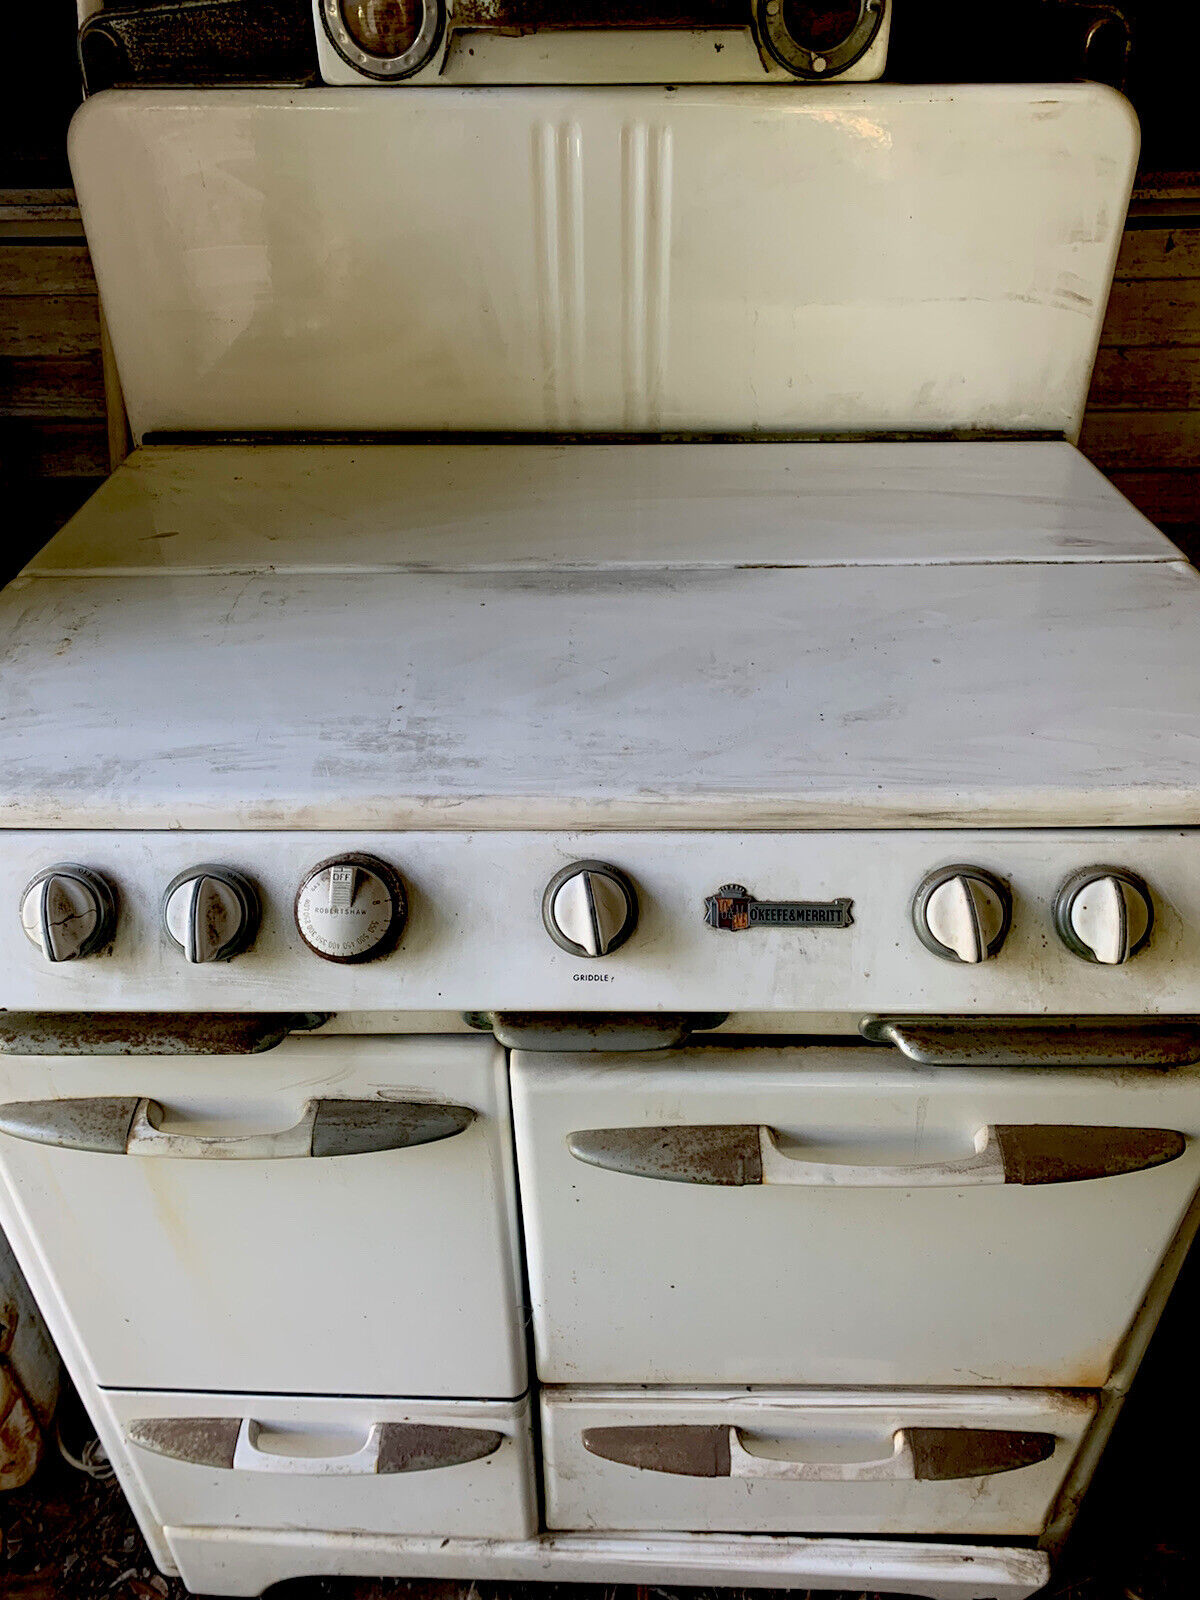 O'Keefe & Merritt 1950's 4 Burner Gas Stove w/ Griddle, Oven & Broiler Has Cover